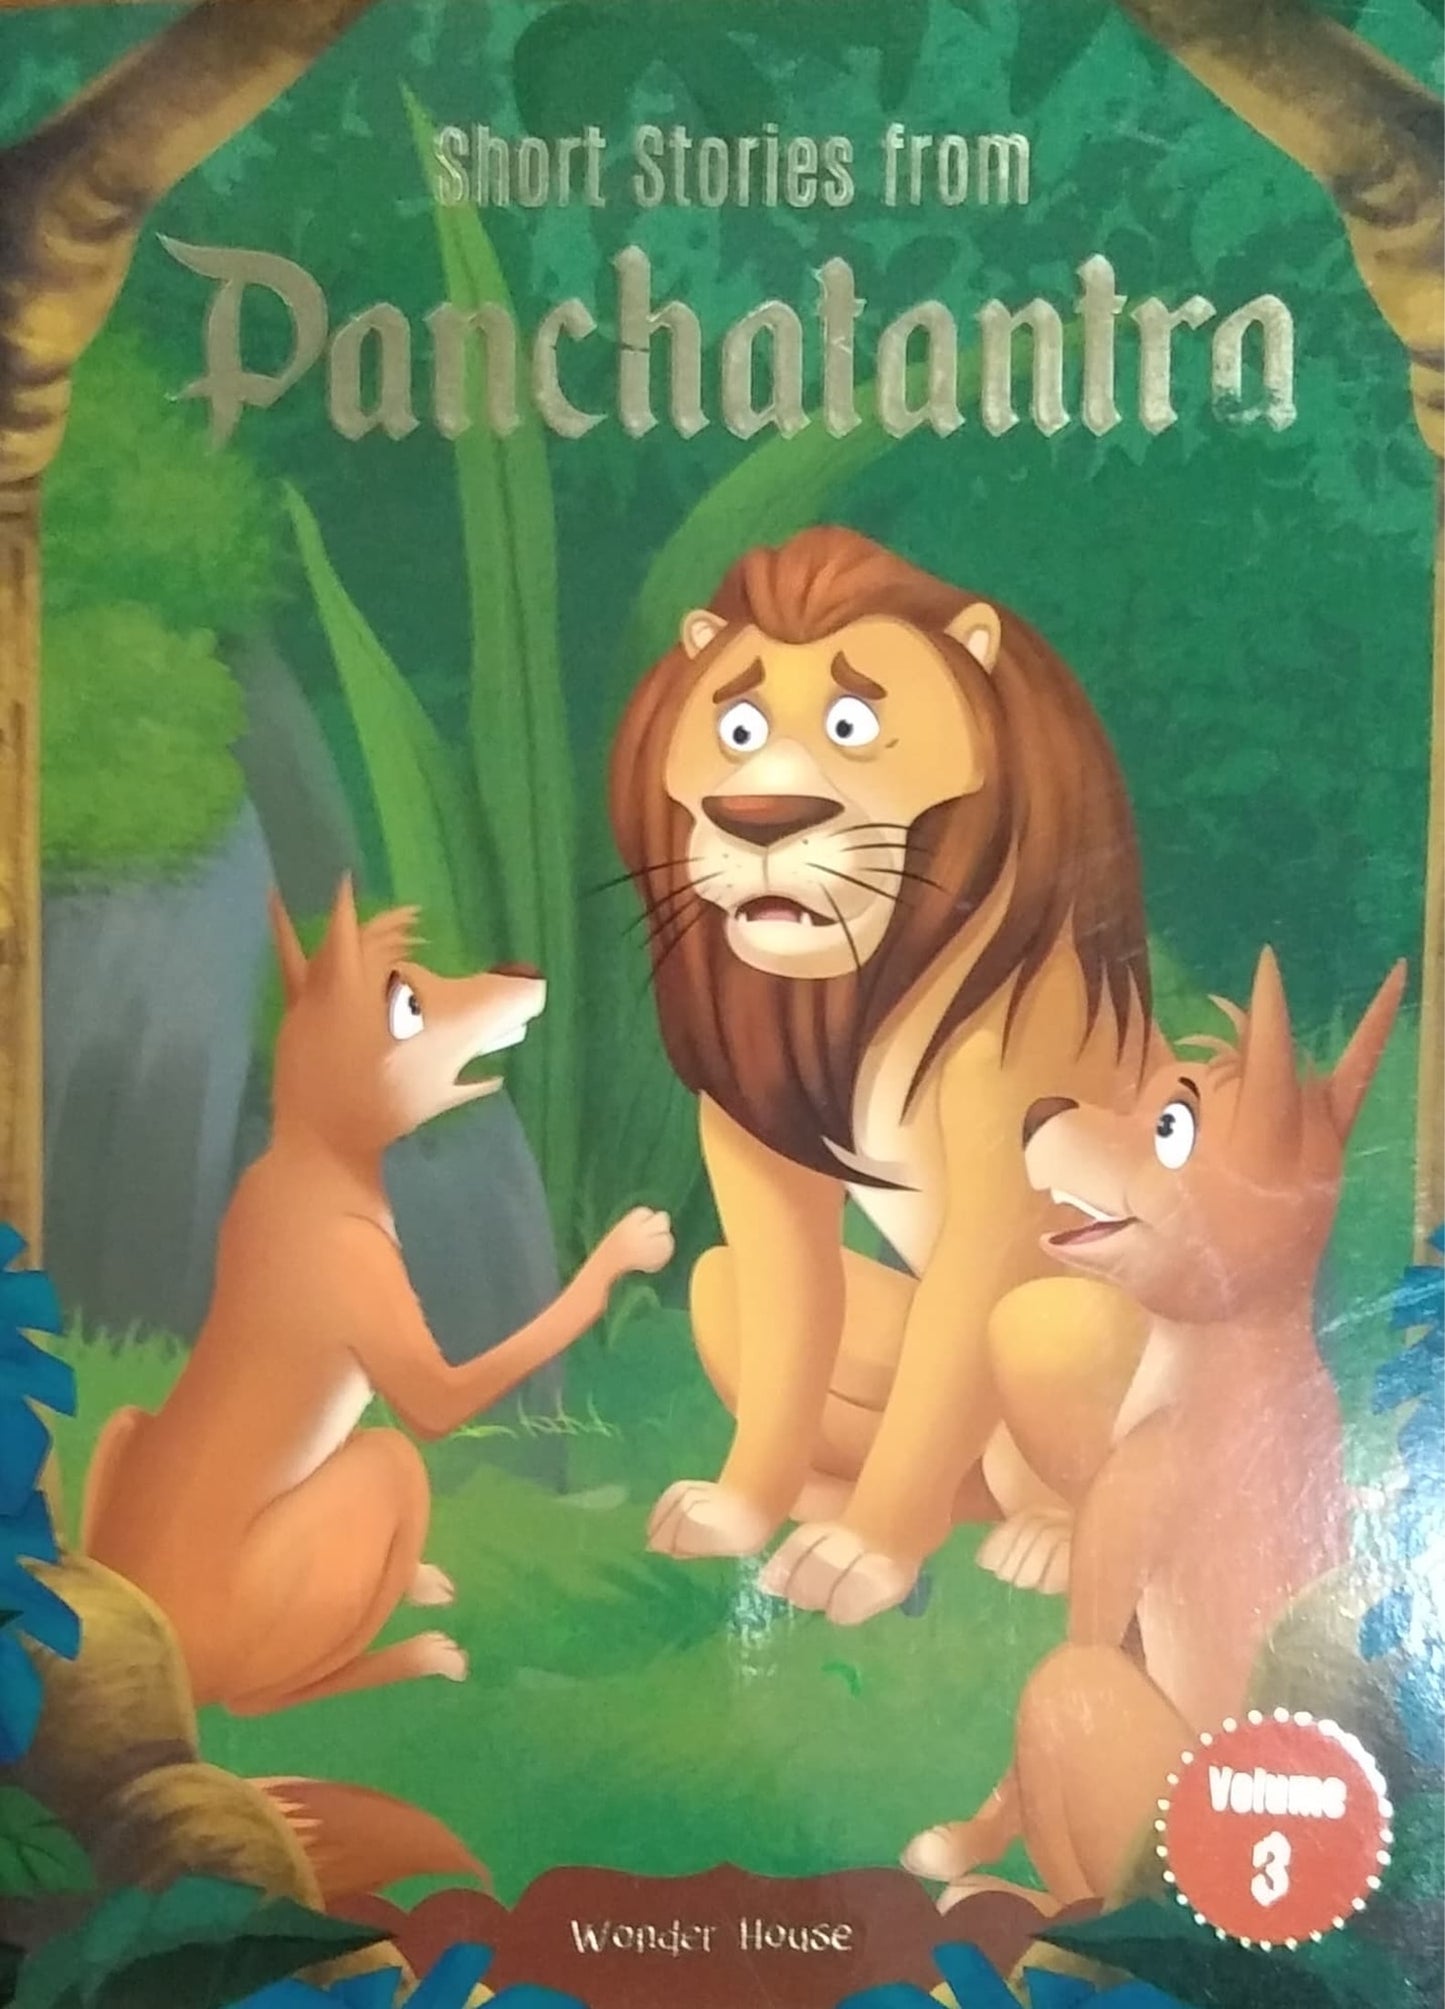 Short Stories from Panchatantra - 3